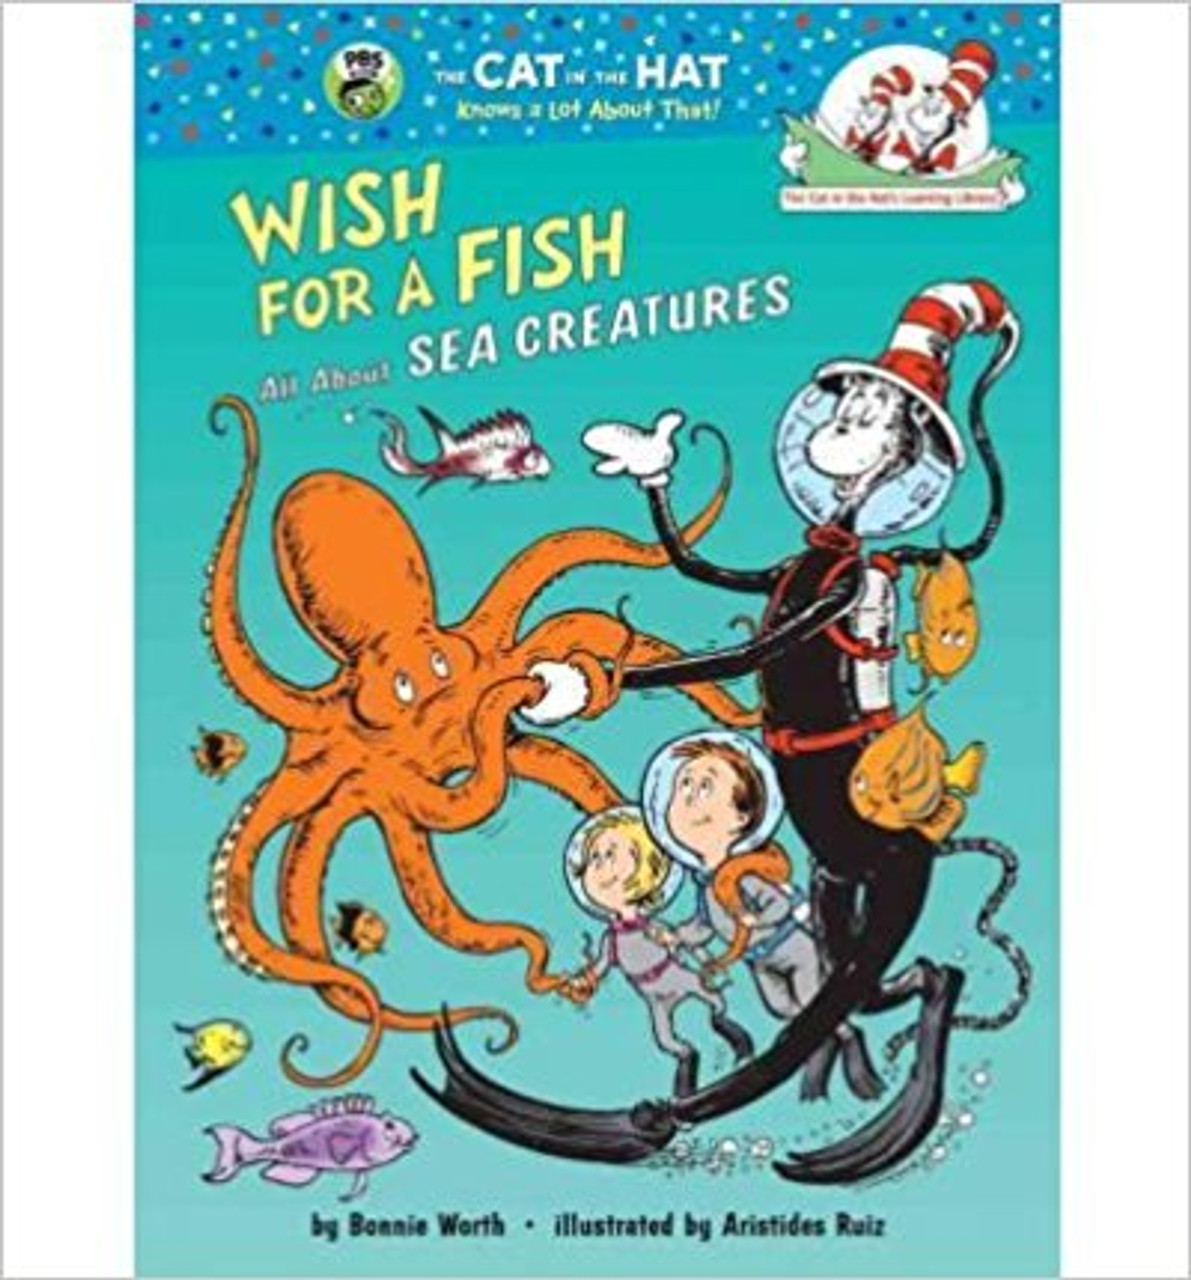 Wish for a Fish: All about Sea Creatures by Bonnie Worth